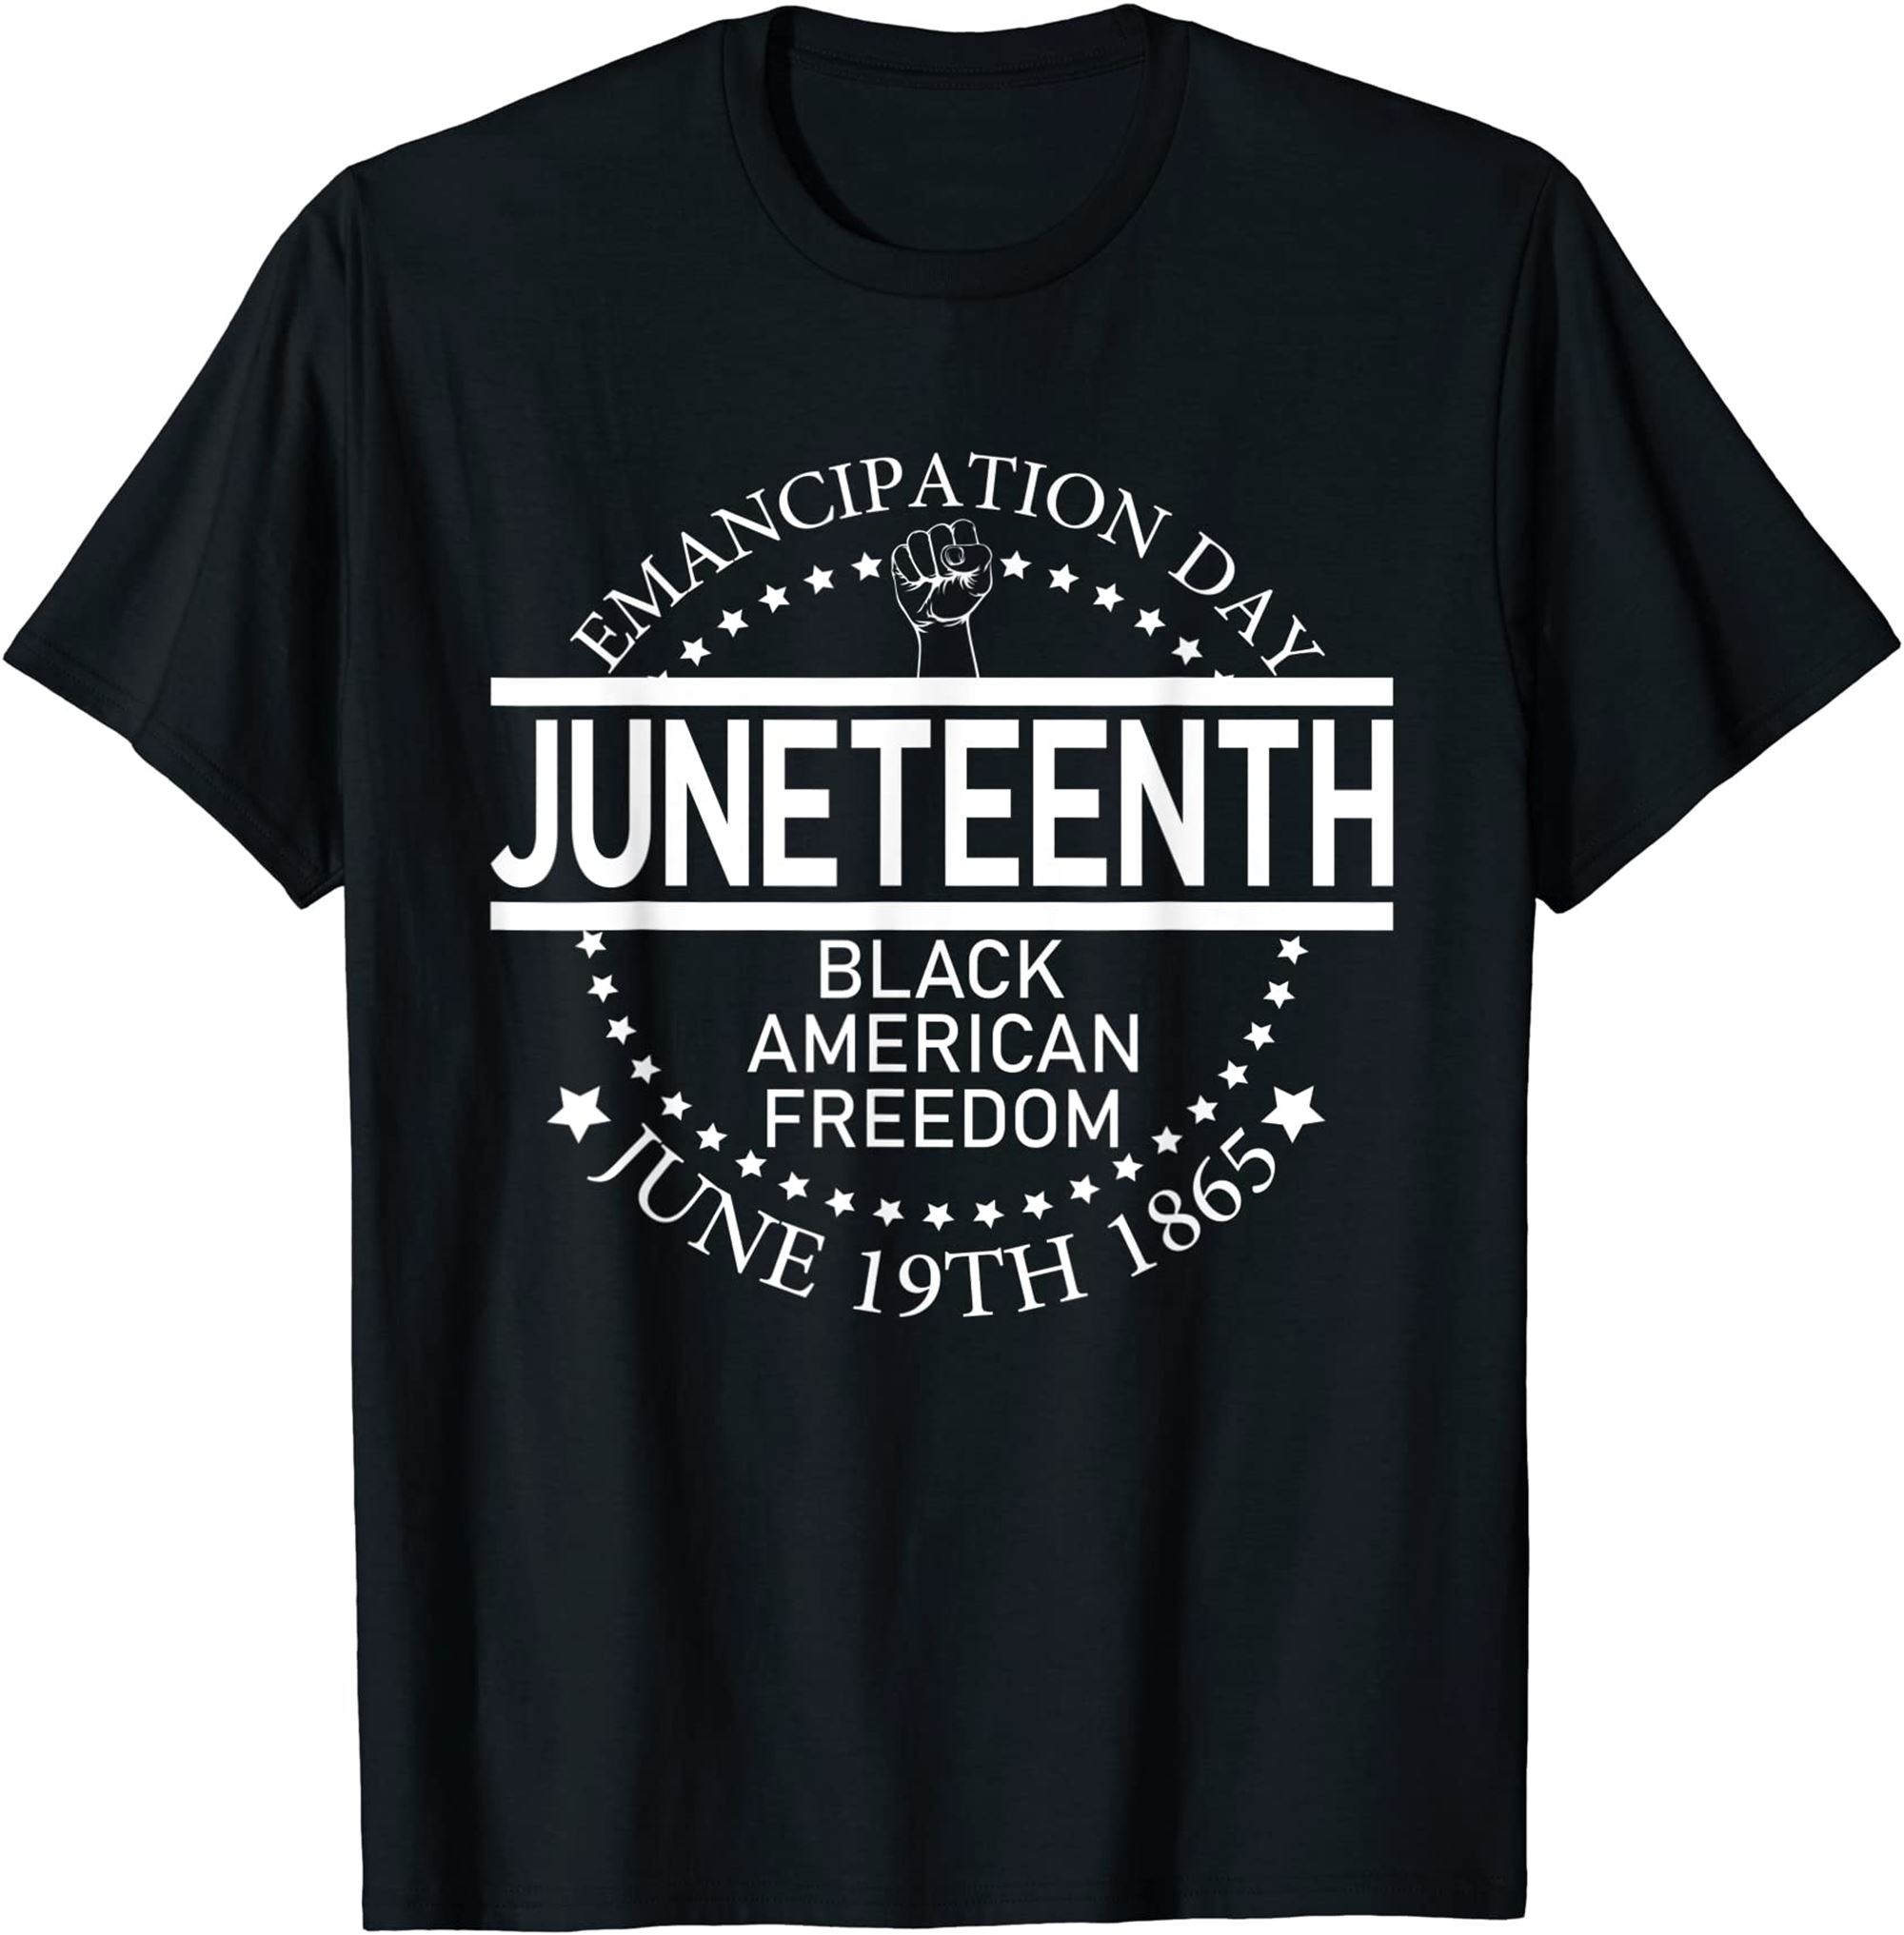 Juneteenth Black African Juneteenth Black History Tee T-shirt Full Size Up To 5xl